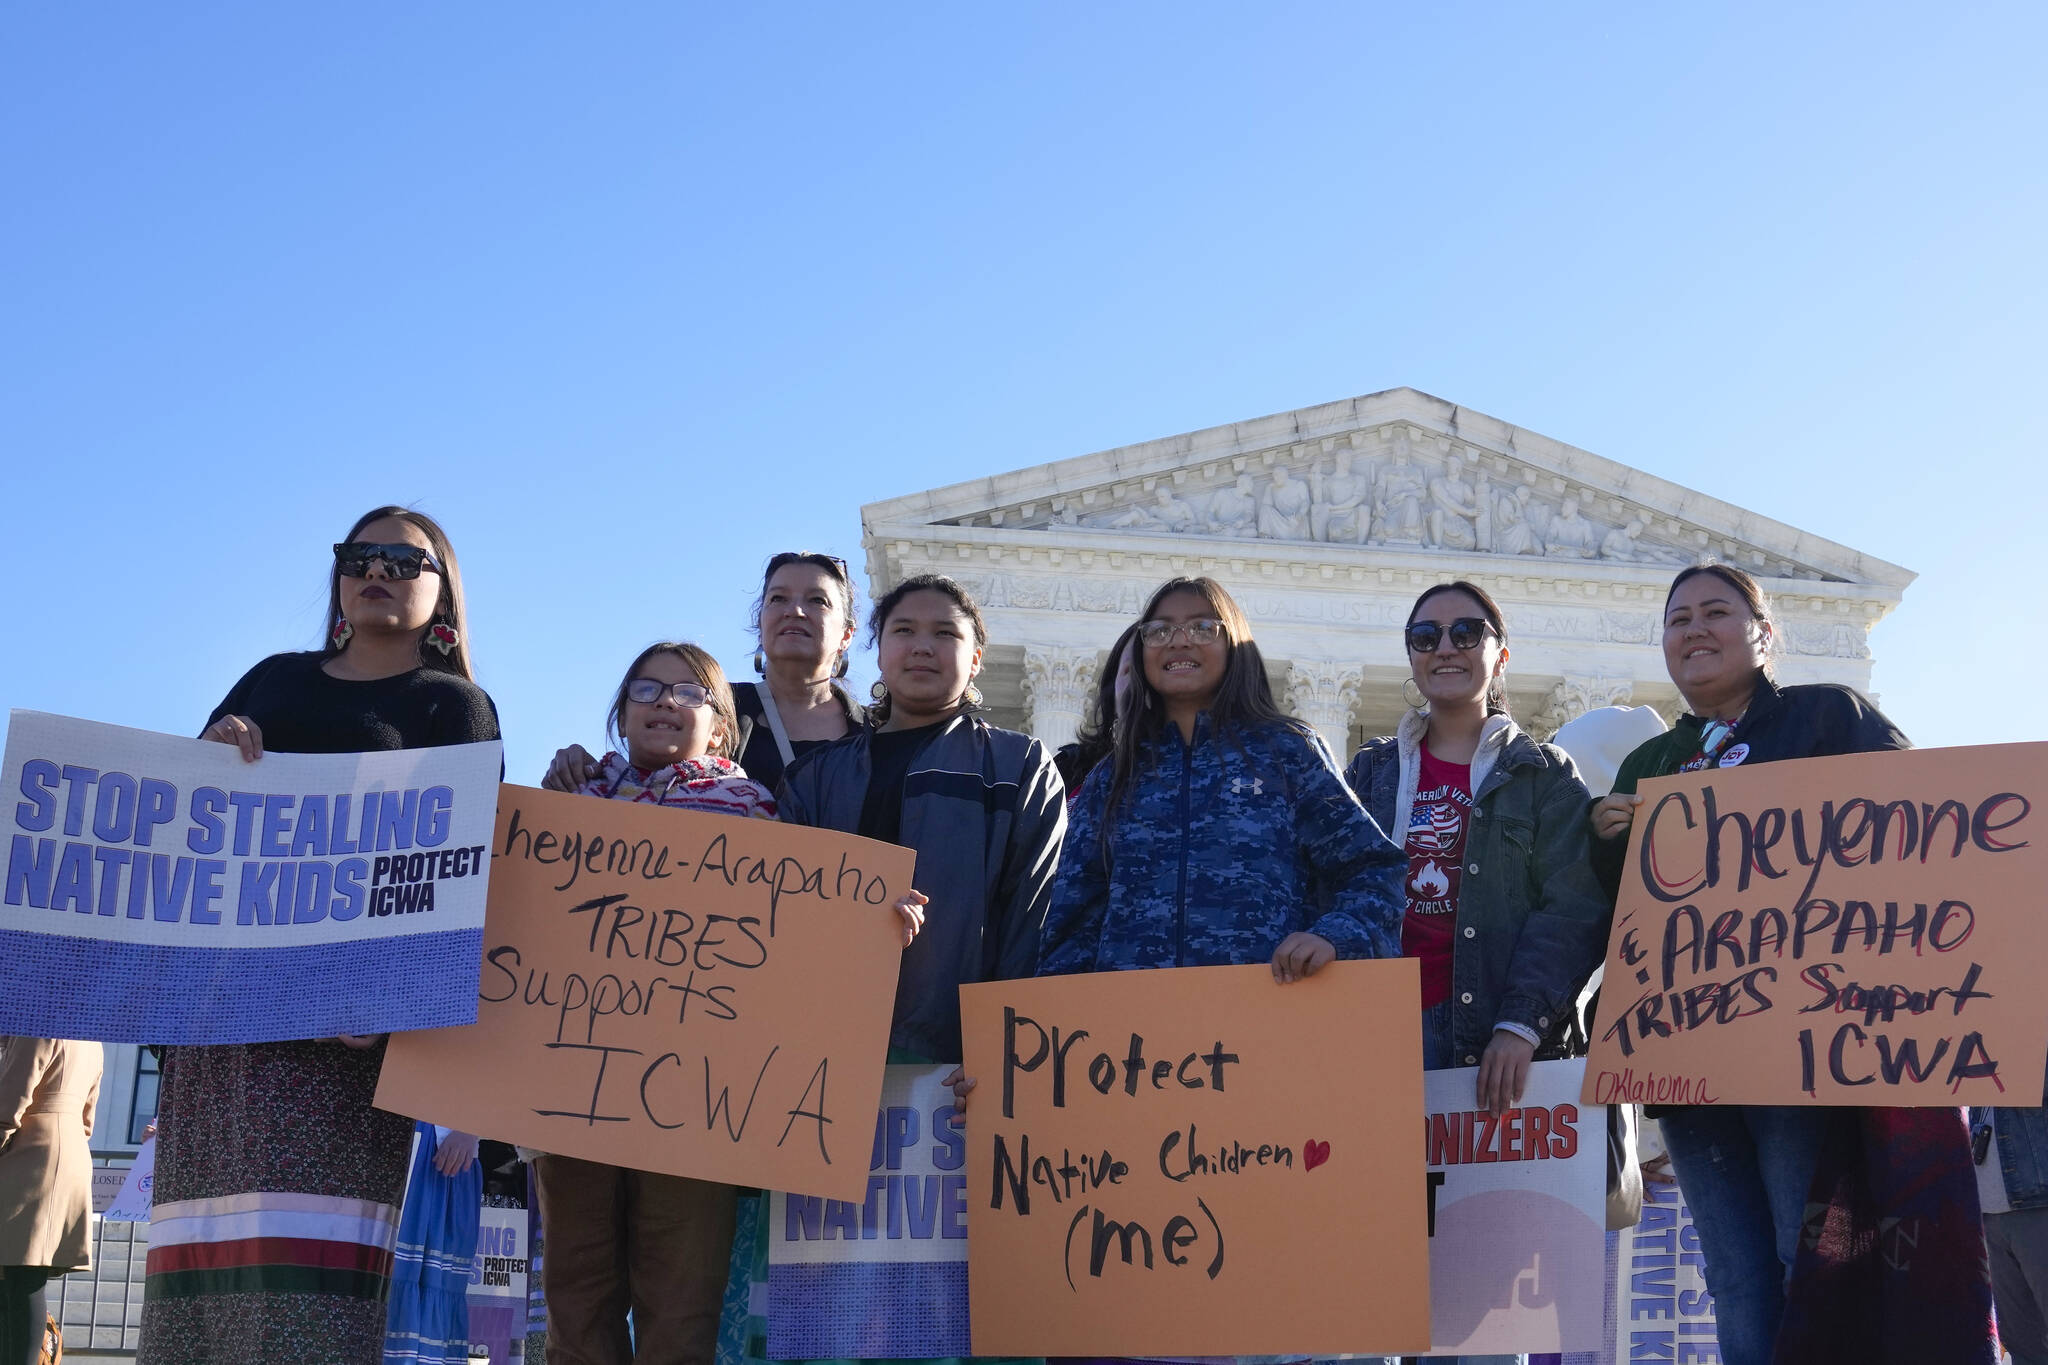 Demonstrators stand outside of the U.S. Supreme Court, as the court hears arguments over the Indian Child Welfare Act, Nov. 9, 2022, in Washington. The Supreme Court on Thursday preserved the 1978 Indian Child Welfare Act, which gives preference to Native American families in foster care and adoption proceedings of Native children, rejecting a broad attack from Republican-led states and white families who argued it is based on race. (AP Photo/Mariam Zuhaib, File)